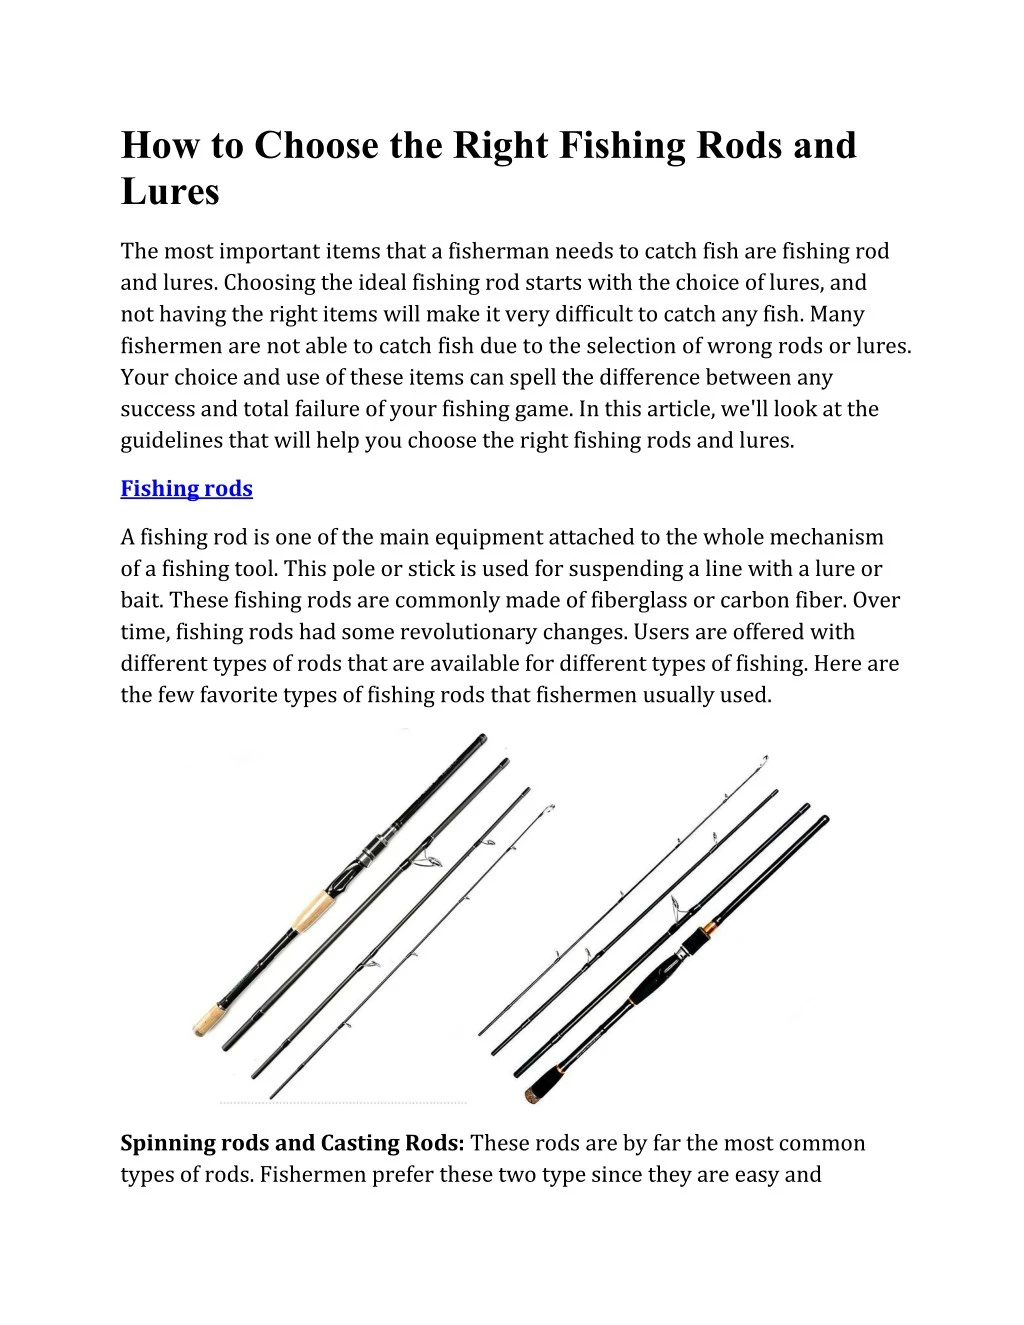 how to choose the right fishing rods and lures